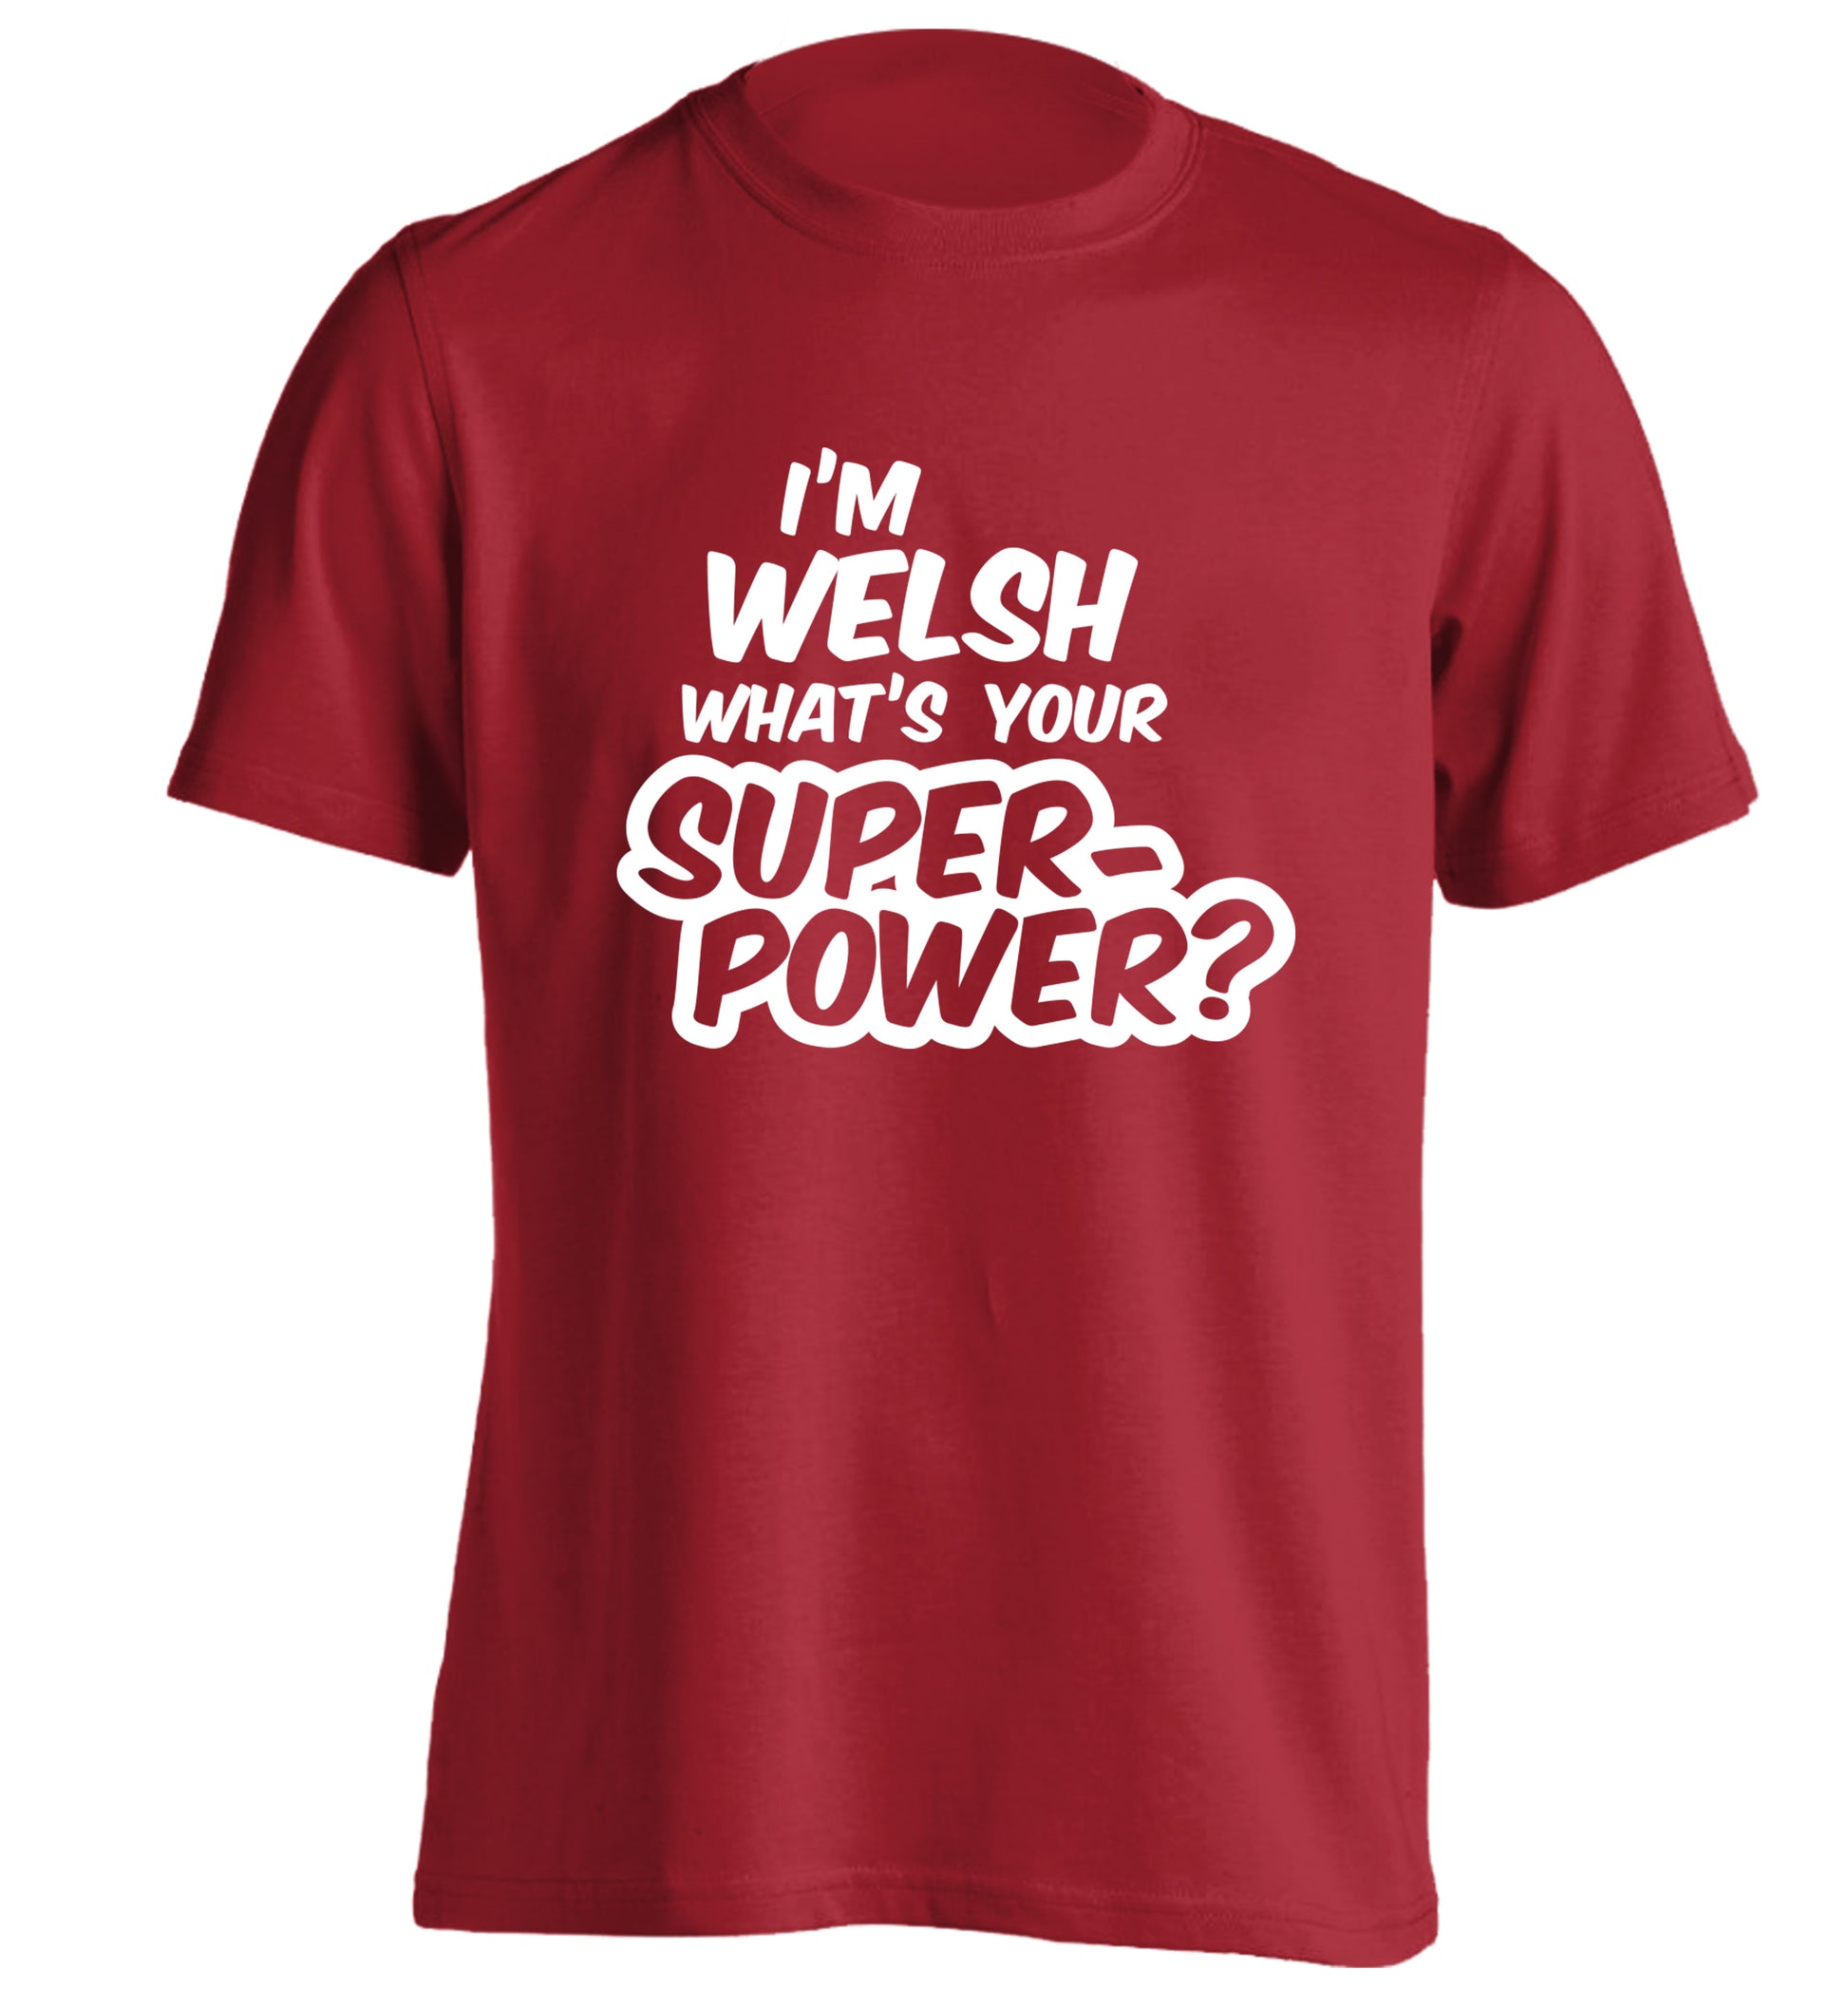 I'm Welsh what's your superpower? adults unisex red Tshirt 2XL